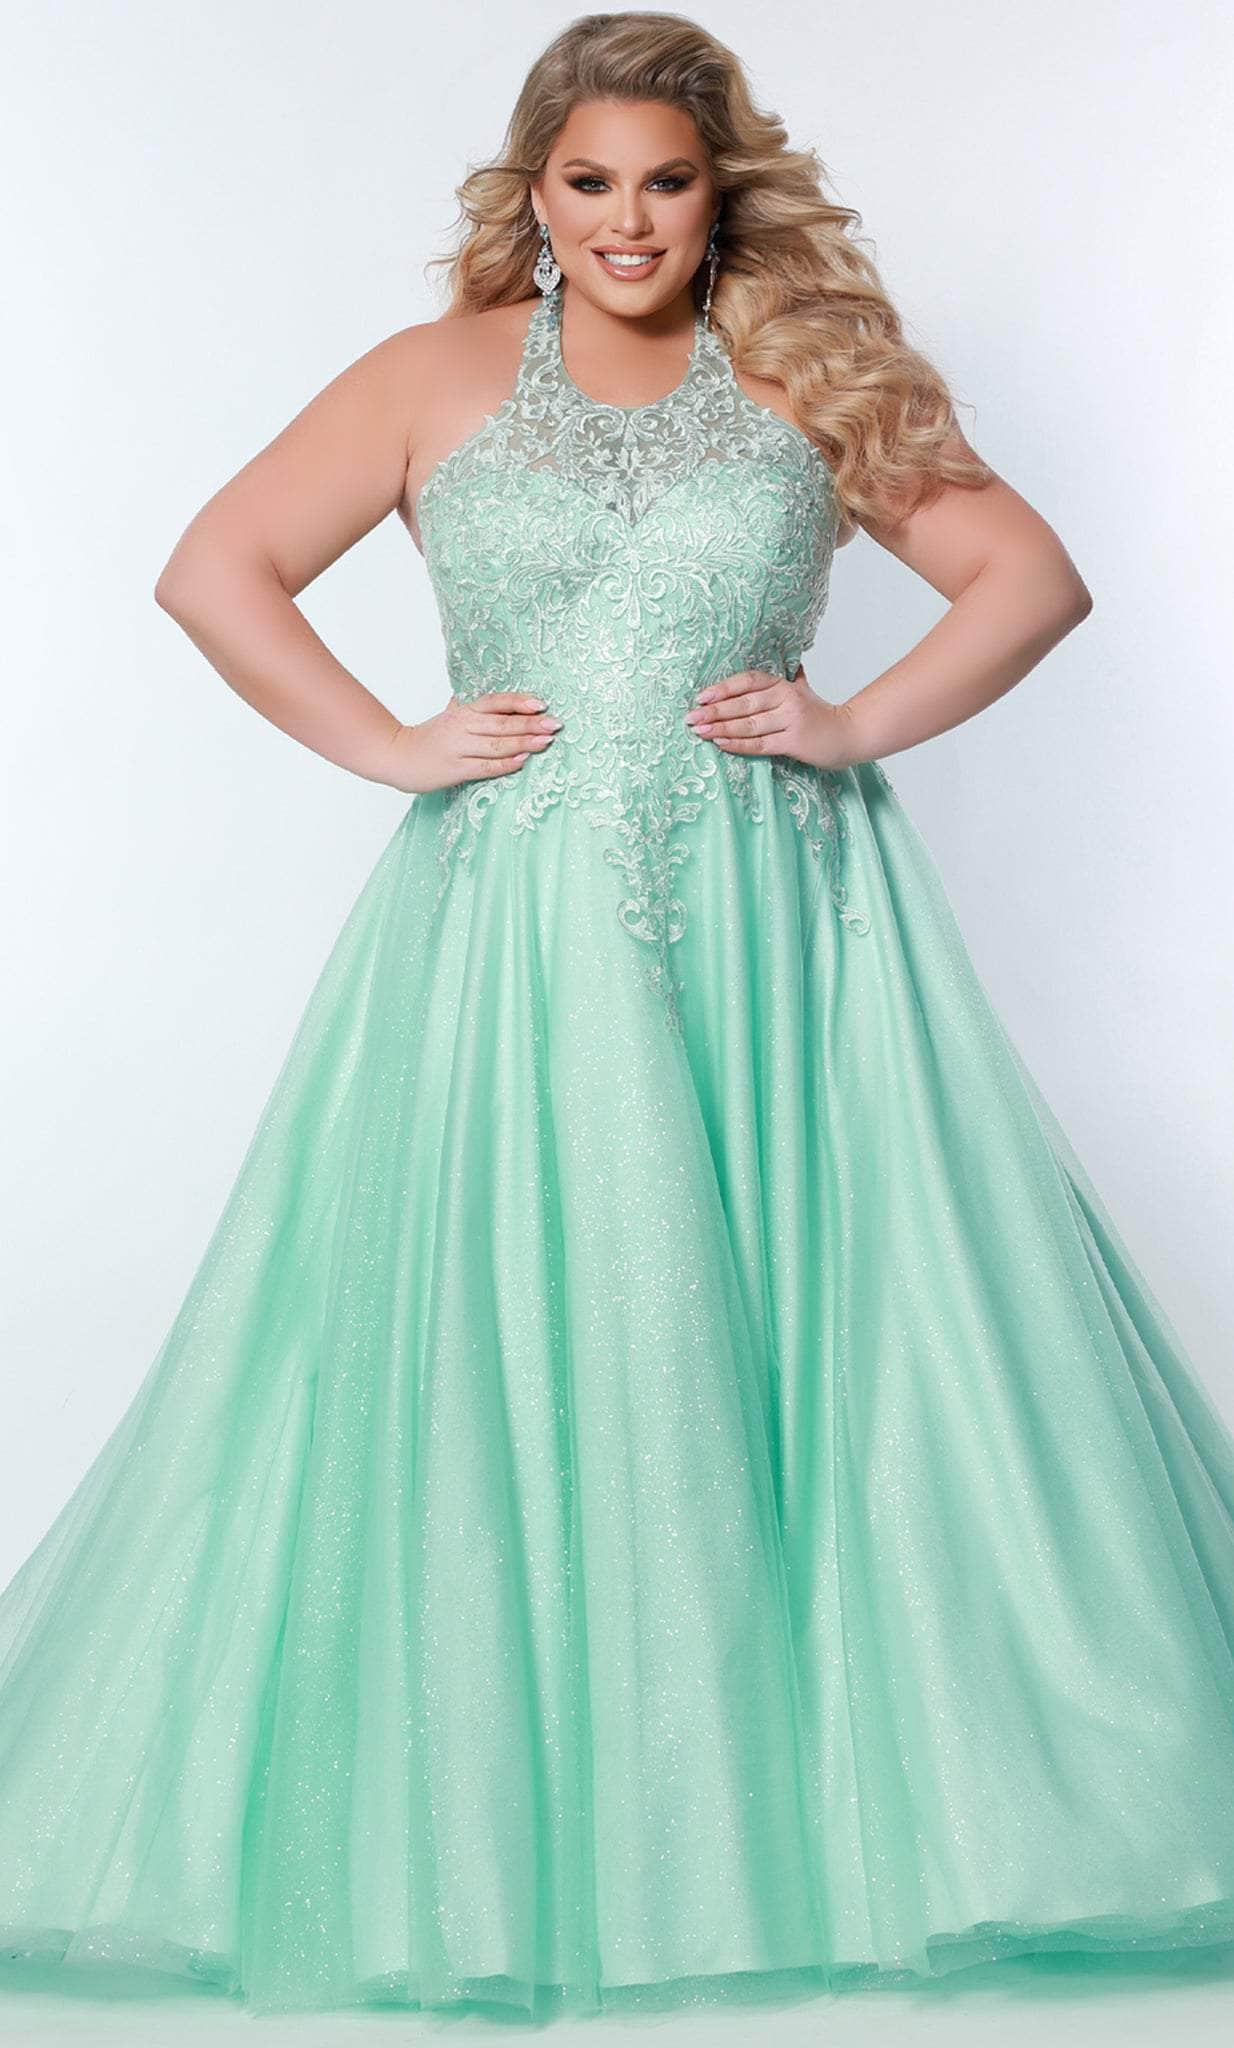 Image of Sydney's Closet SC7352 - Embroidered Halter Prom Gown